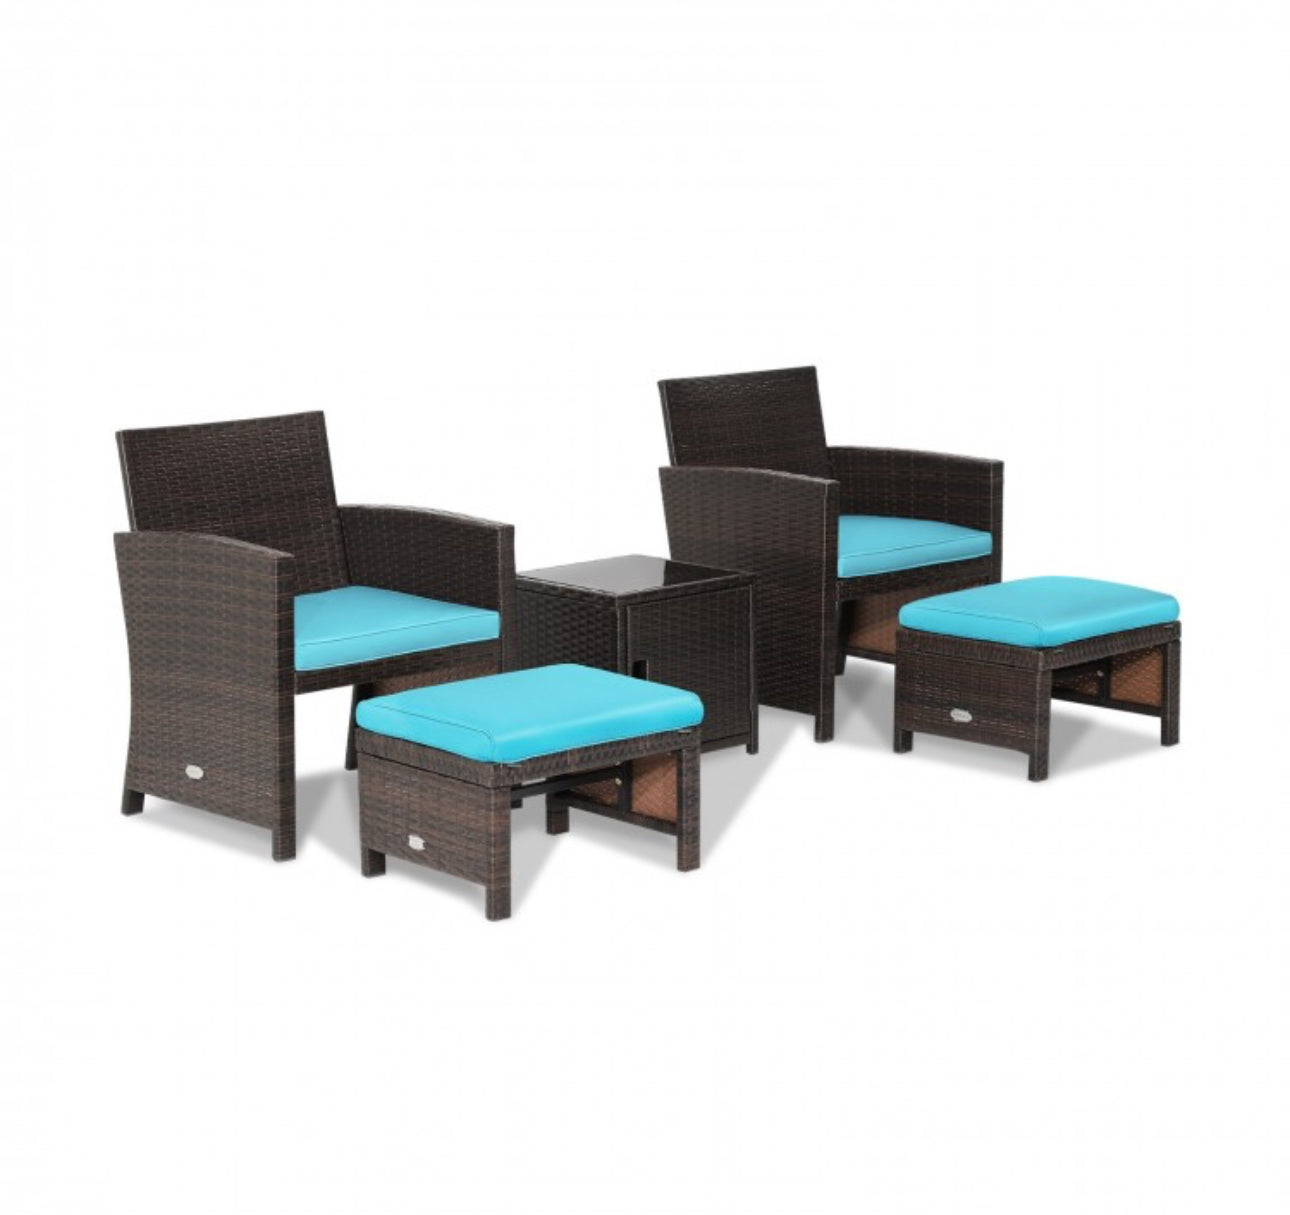 Elegant Heavy Duty 5-Piece Patio Rattan Furniture Set With Ottoman, Beautiful Tempered Glass Coffee Table | Cozy Chairs